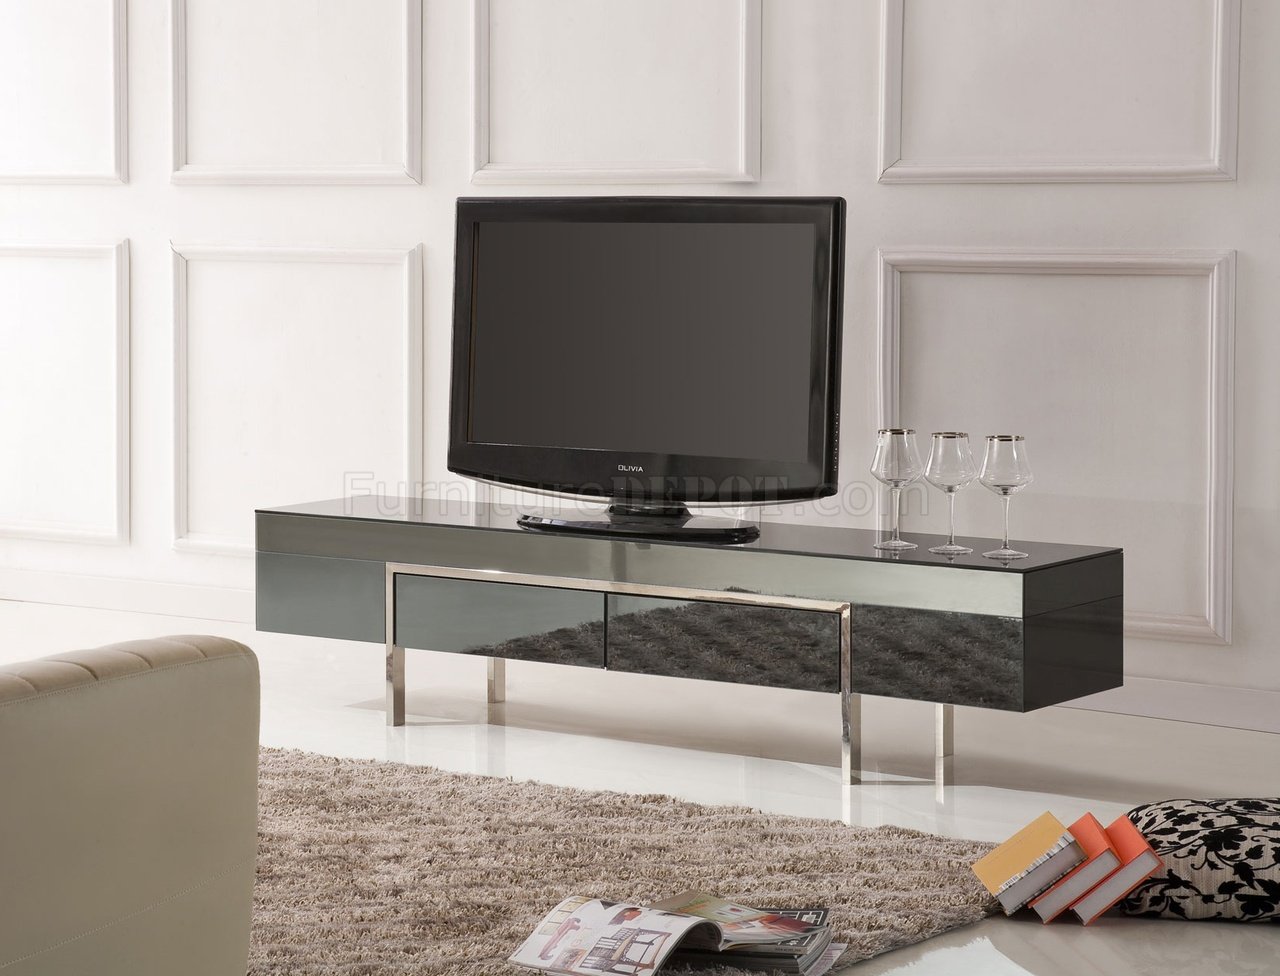 Black High Gloss Laquer Finish Modern TV Stand w/Metal Legs - Click Image to Close